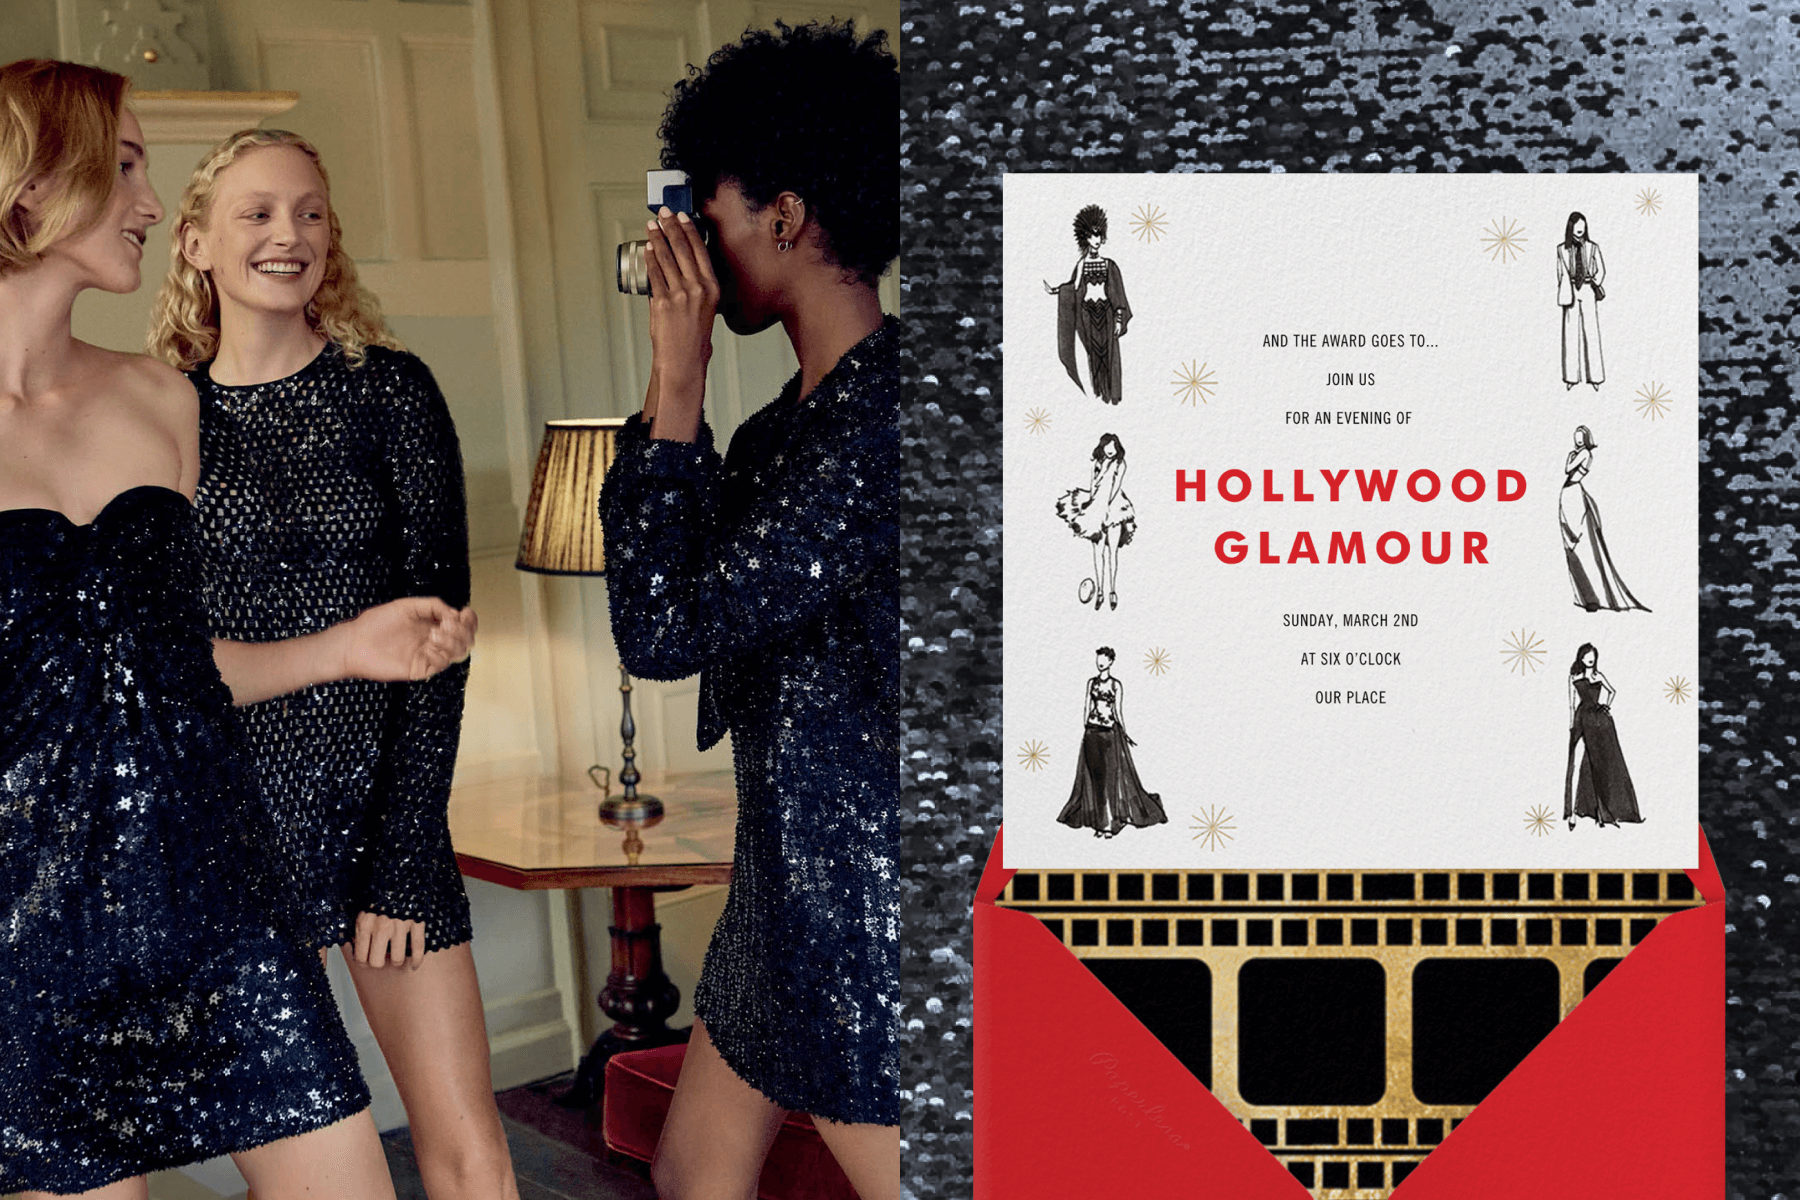 Left: A woman takes a photo of two other women, all dressed im black sparkly dresses. Right: An invitation to an “evening of Hollywood glamour” with six sketches of iconic awards show dresses on a black sequined backdrop.